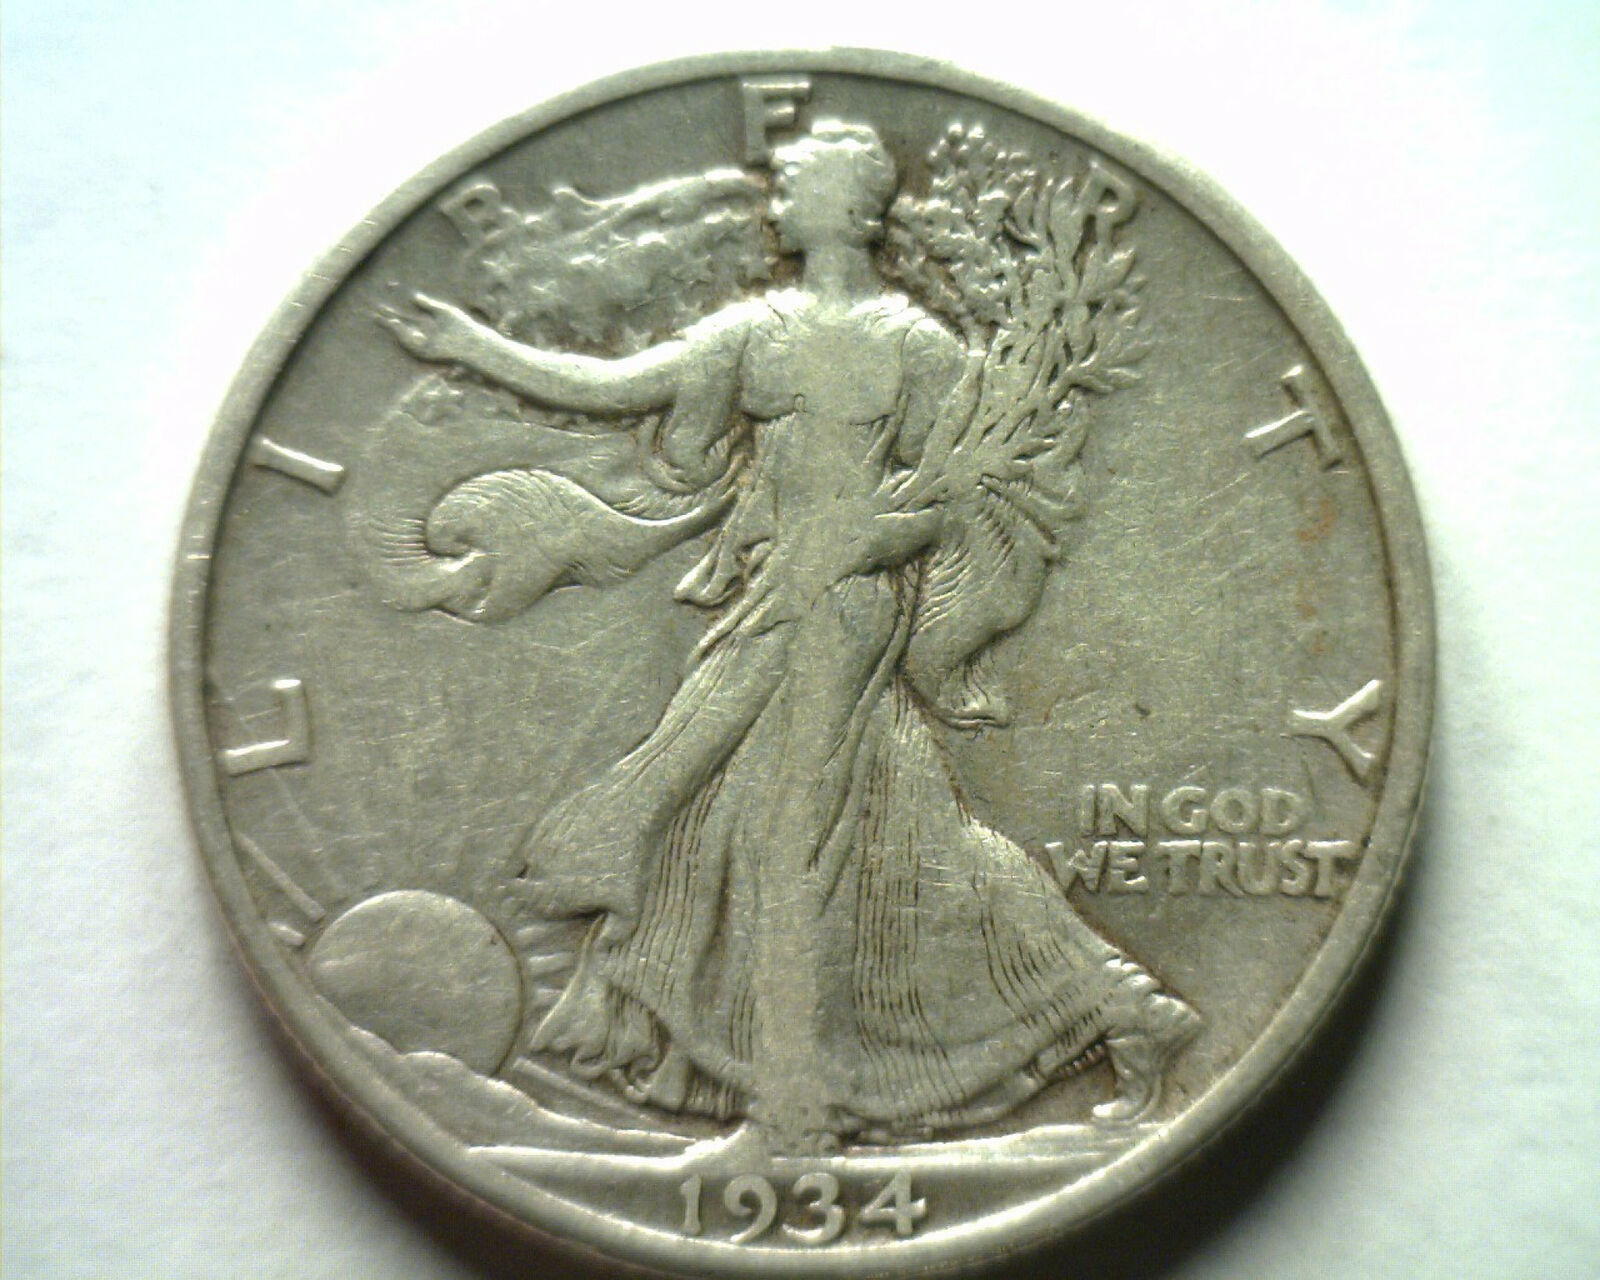 Primary image for 1934-S WALKING LIBERTY HALF VERY FINE /EXTRA FINE VF/XF VERY FINE/EXTREMELY FINE